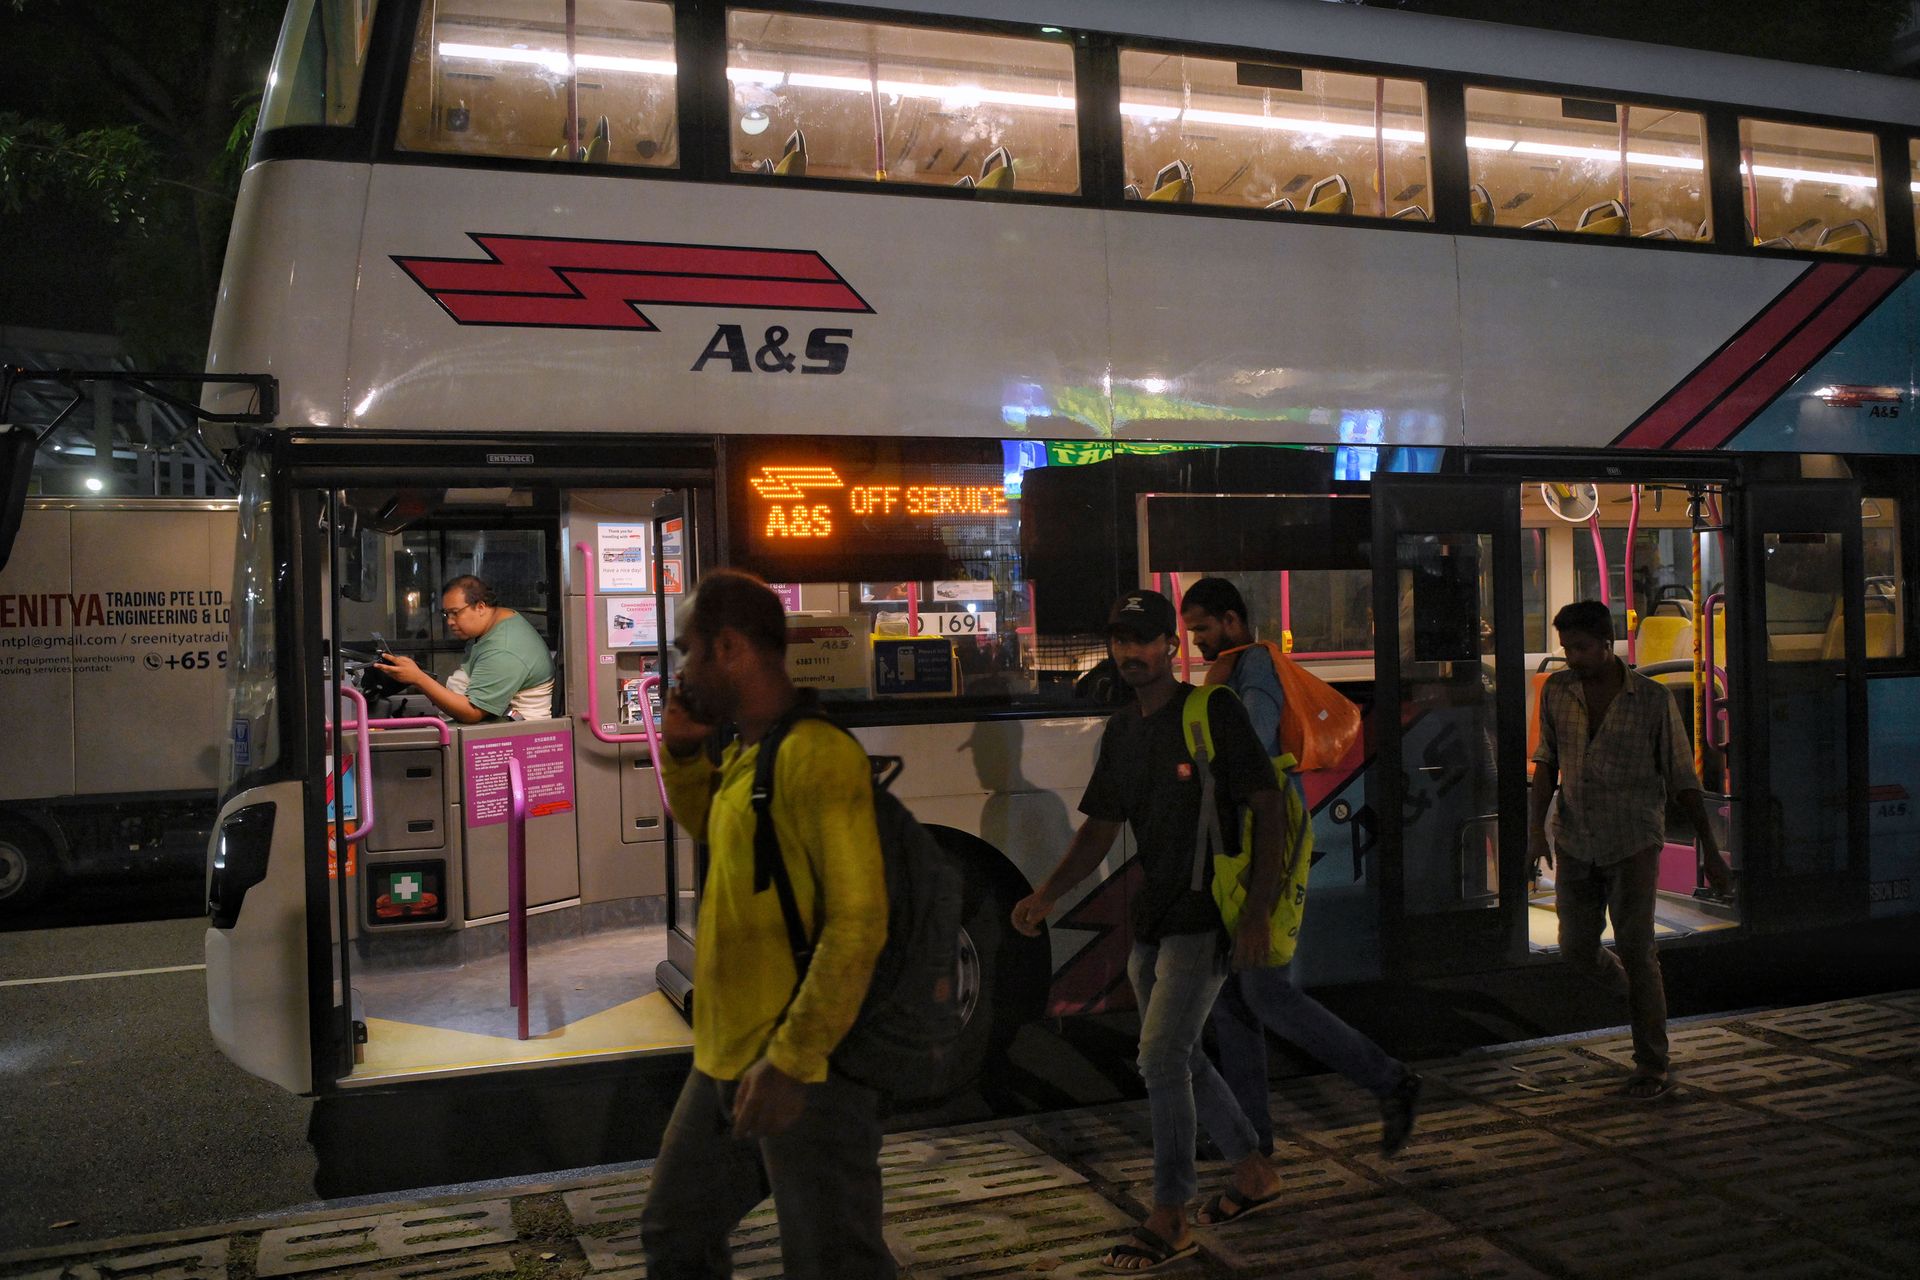 He currently drives a Volvo B8L double-decker bus, the only one of its kind in Singapore. It served as a trial bus at SBS Transit from 2018 to 2020, before A&S bought it in 2022.